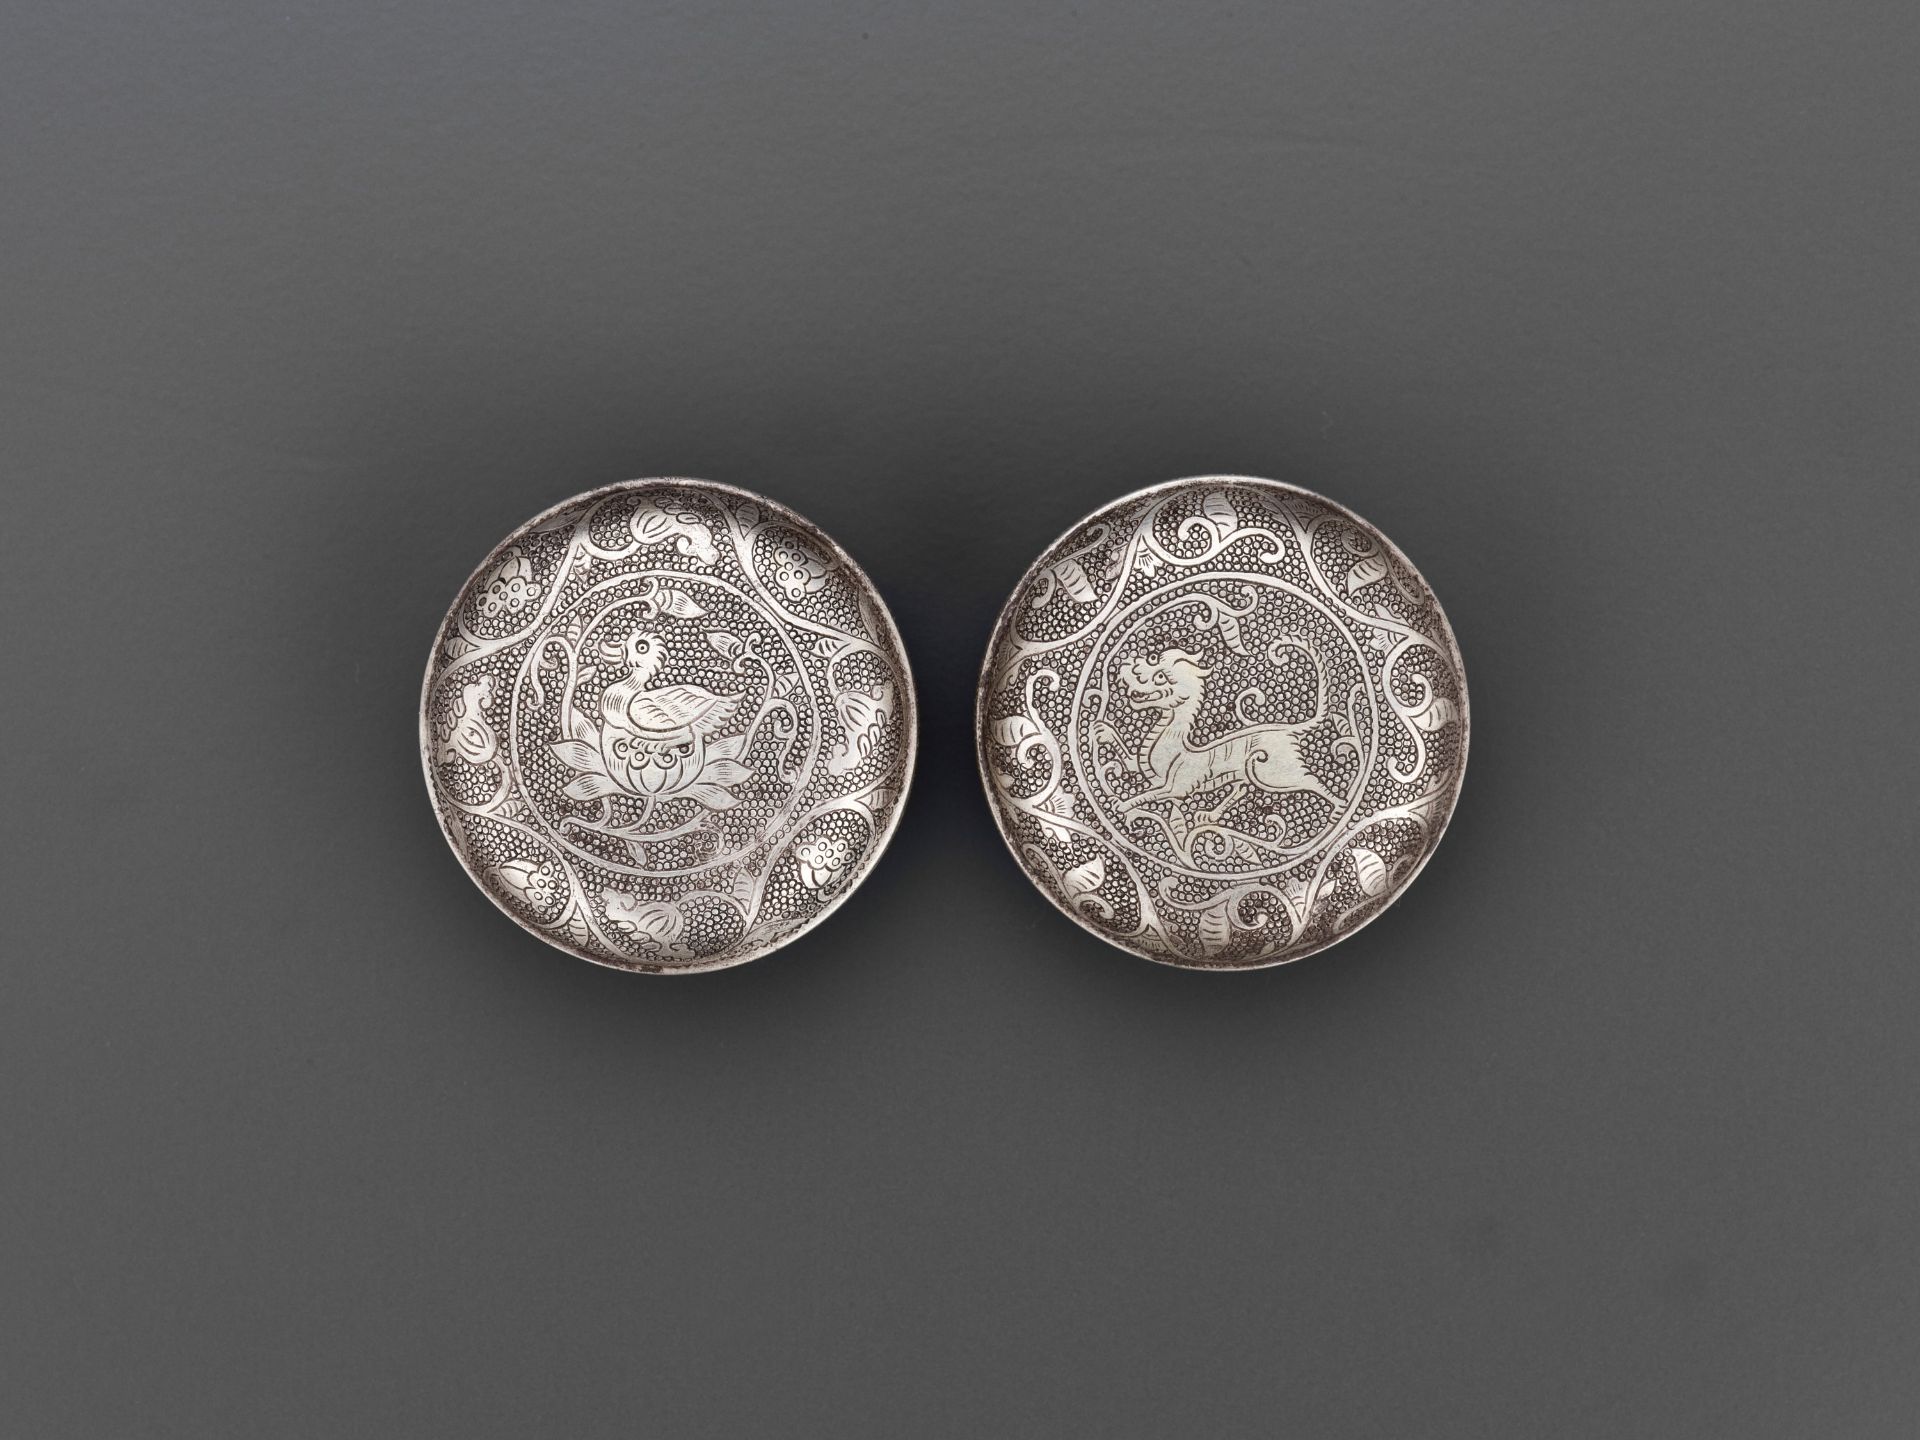 A 'MANDARIN DUCK' SILVER BOX AND COVER, TANG DYNASTY